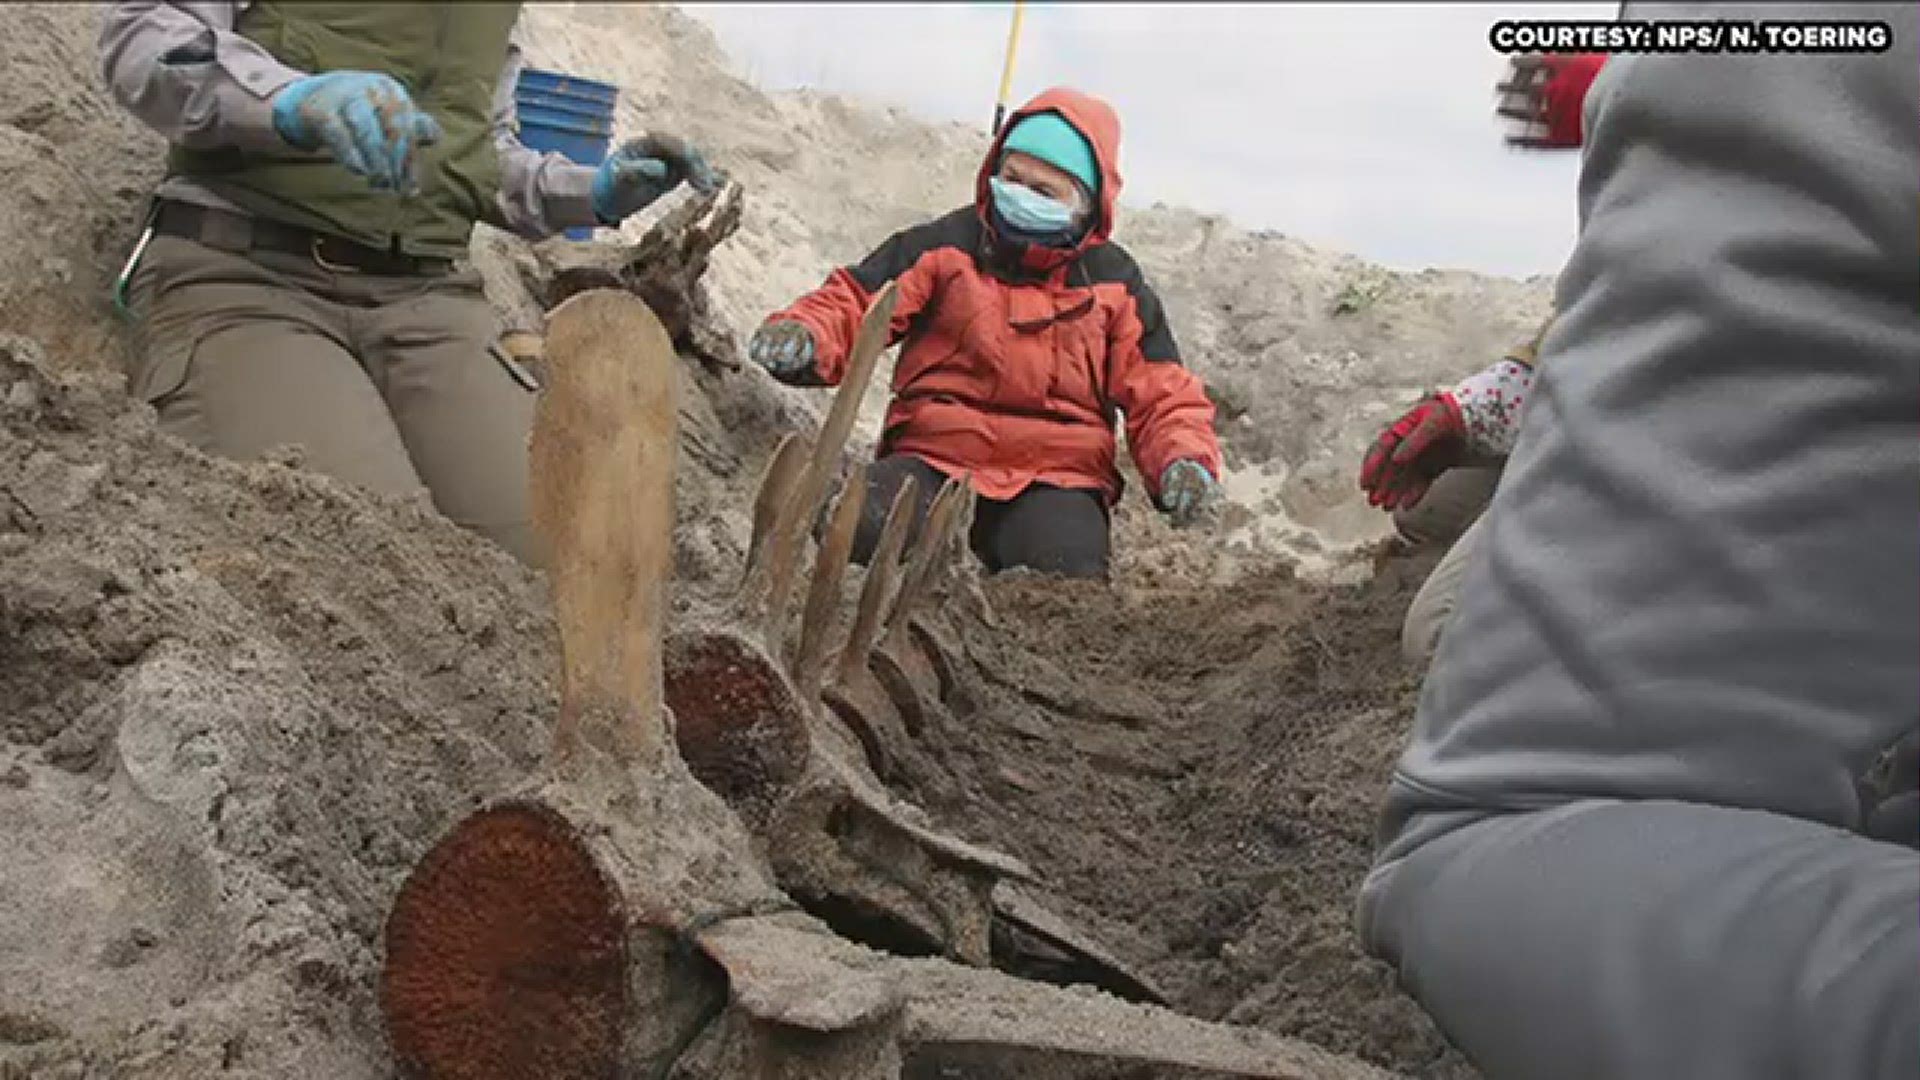 Cape Lookout National Seashore staff along with those from the Bonehenge Whale Center in Beaufort dug up a whale’s carcass over the weekend.